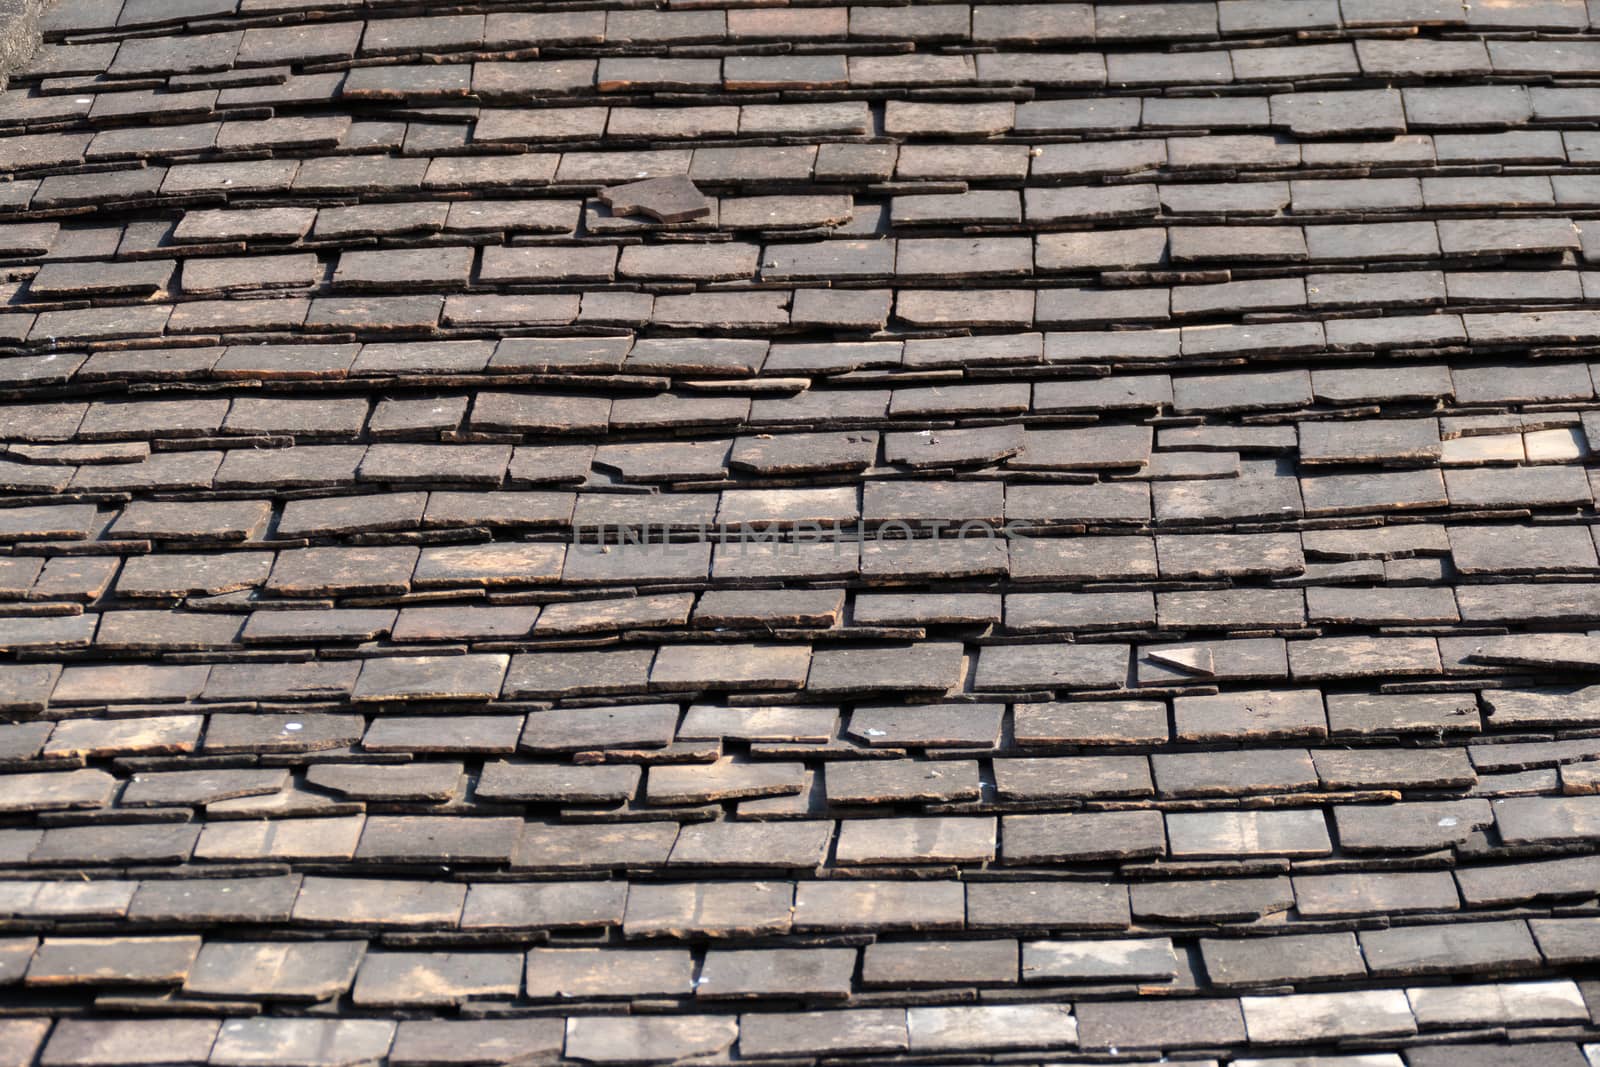 Abstract Detail of Old Slate Roof Tiles by teerawit